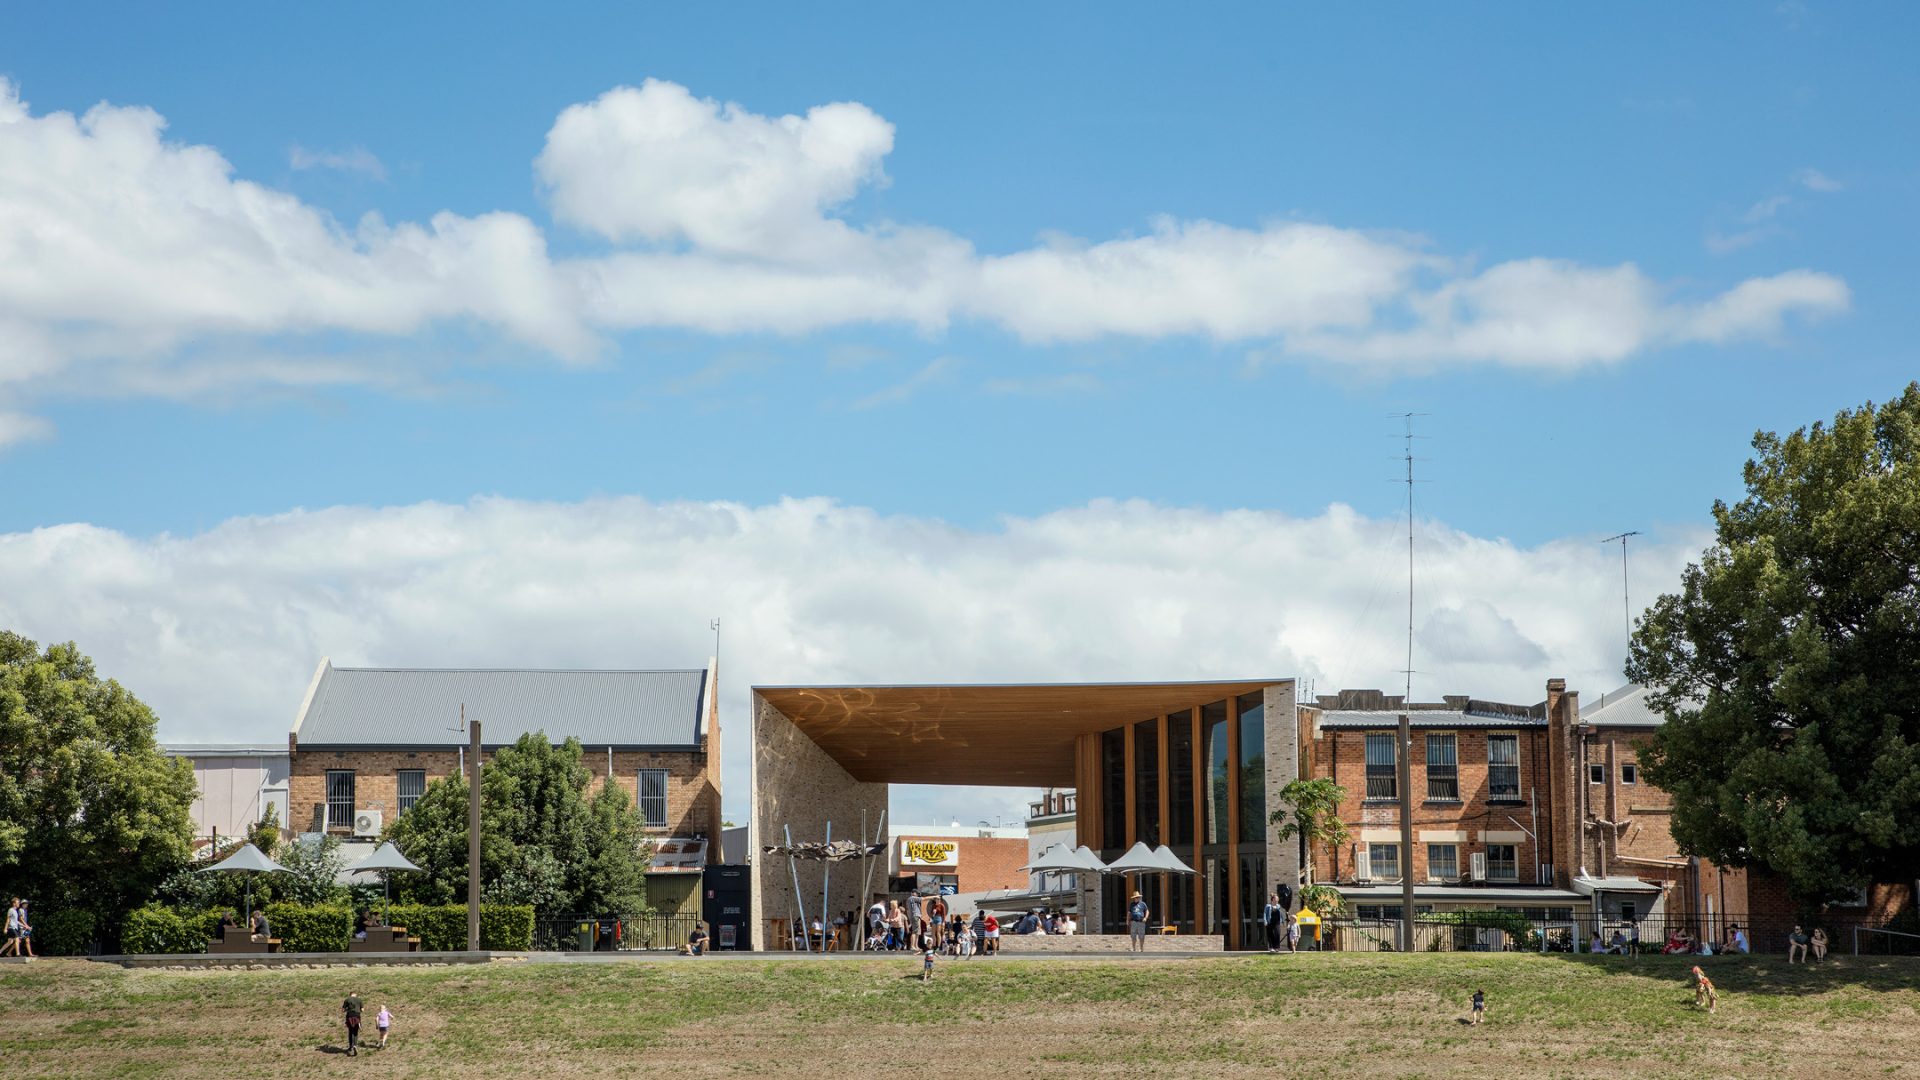 A modern building with a large, open wooden structure and an overhanging roof stands in an urban area. Surrounding it are older brick buildings. People are visible in a grassy area near the levee in the foreground under a blue sky with scattered clouds.